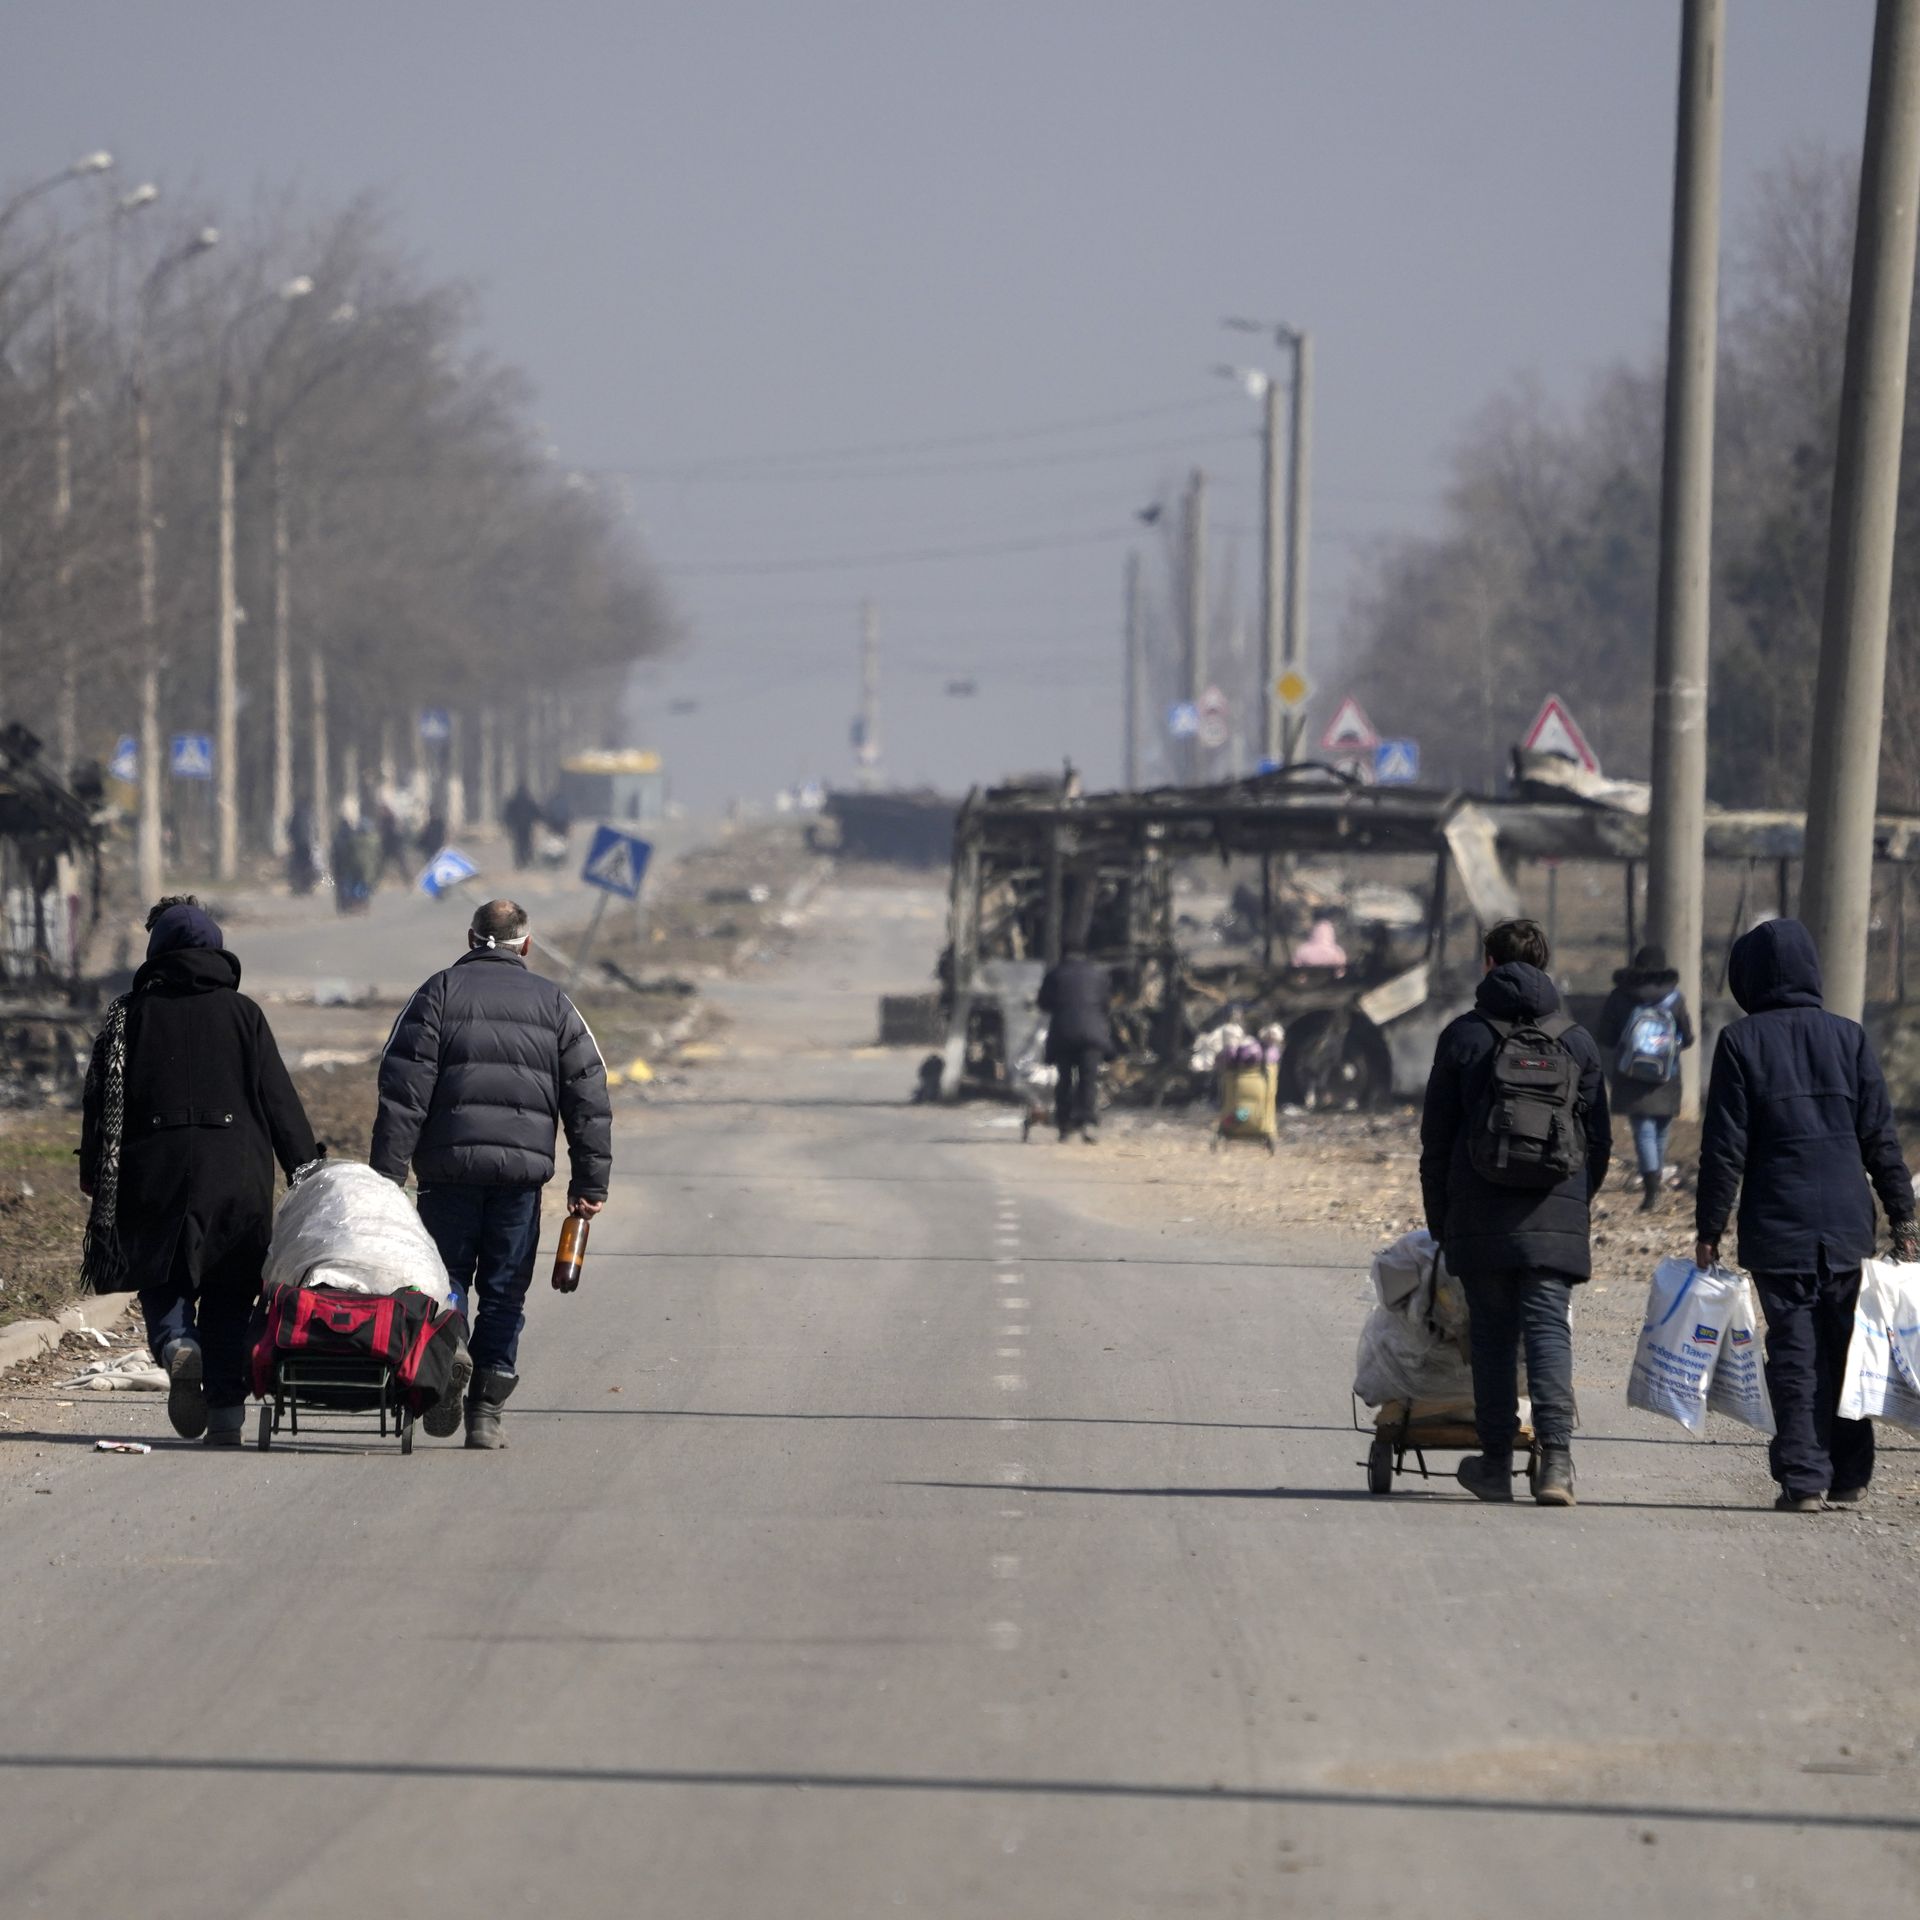 Civilians are being evacuated along humanitarian corridors from the Ukrainian city of Mariupol under the control of Russian military and pro-Russian separatists, on March 24, 2022